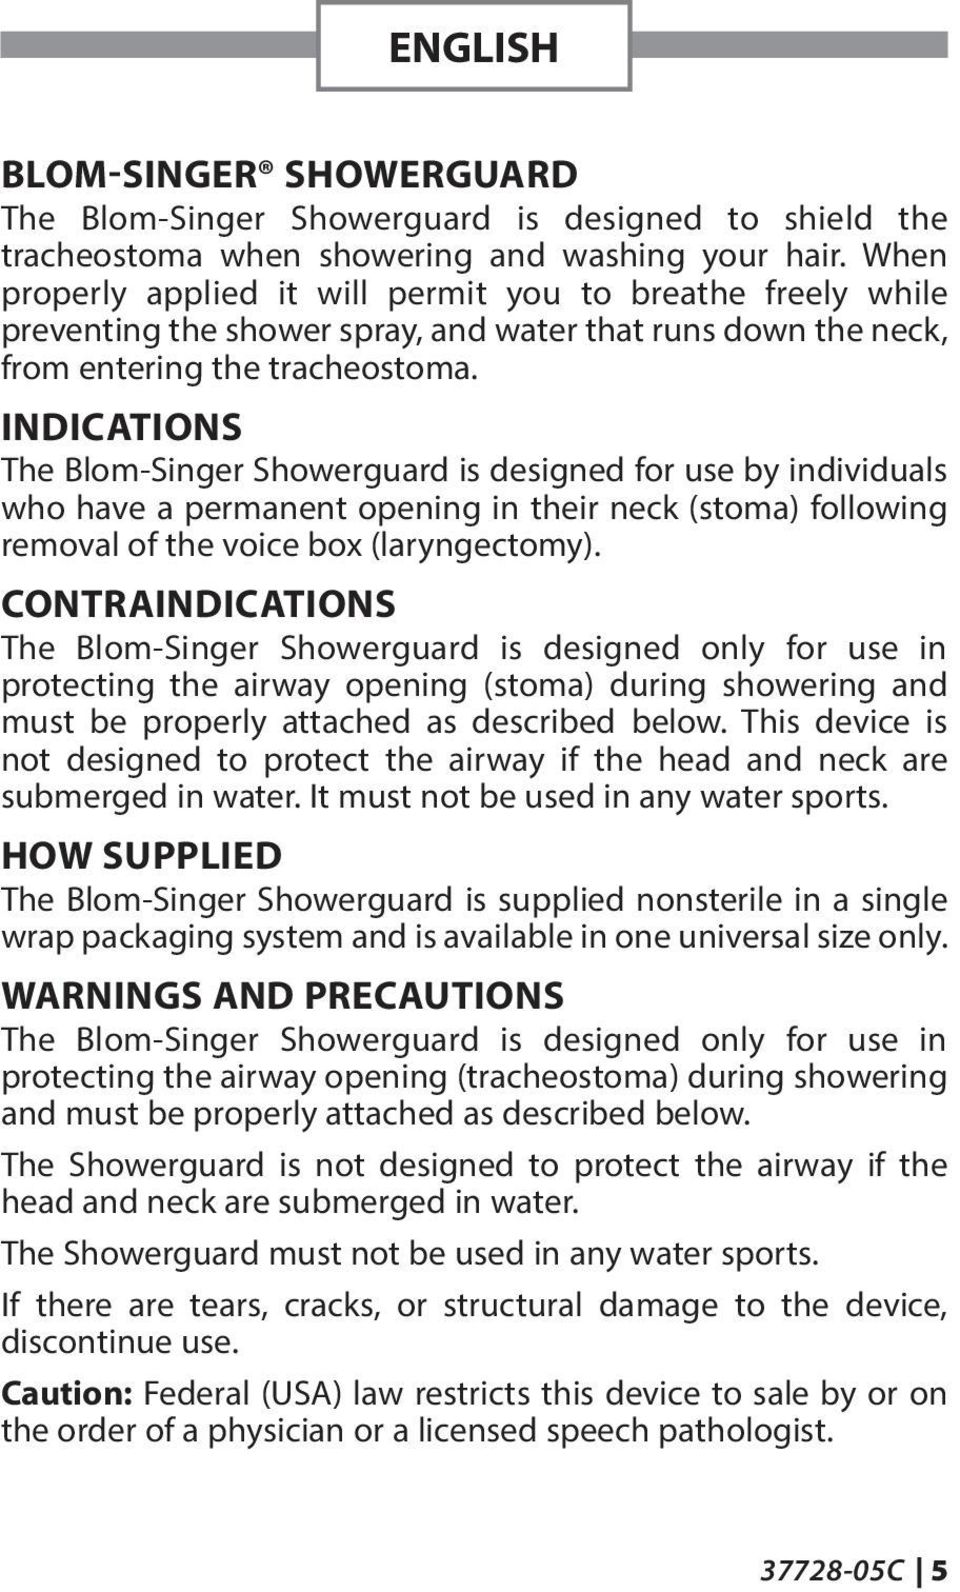 INDICATIONS The Blom-Singer Showerguard is designed for use by individuals who have a permanent opening in their neck (stoma) following removal of the voice box (laryngectomy).